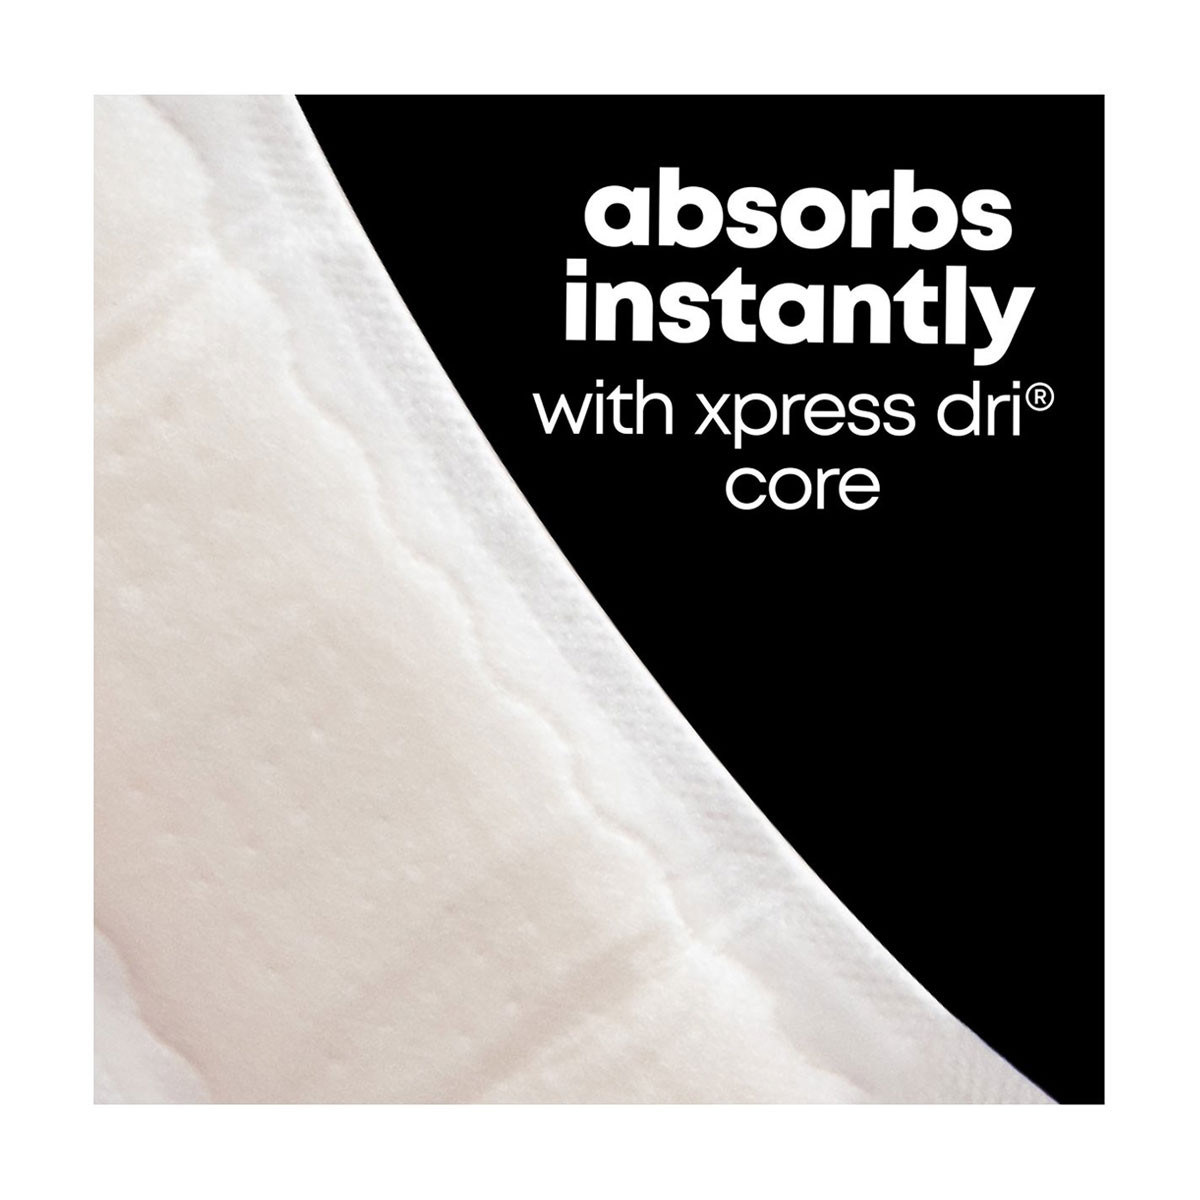 Kotex Security Maxi Overnight Pads Double Pack, 28 units – U by Kotex : Pads  and cup